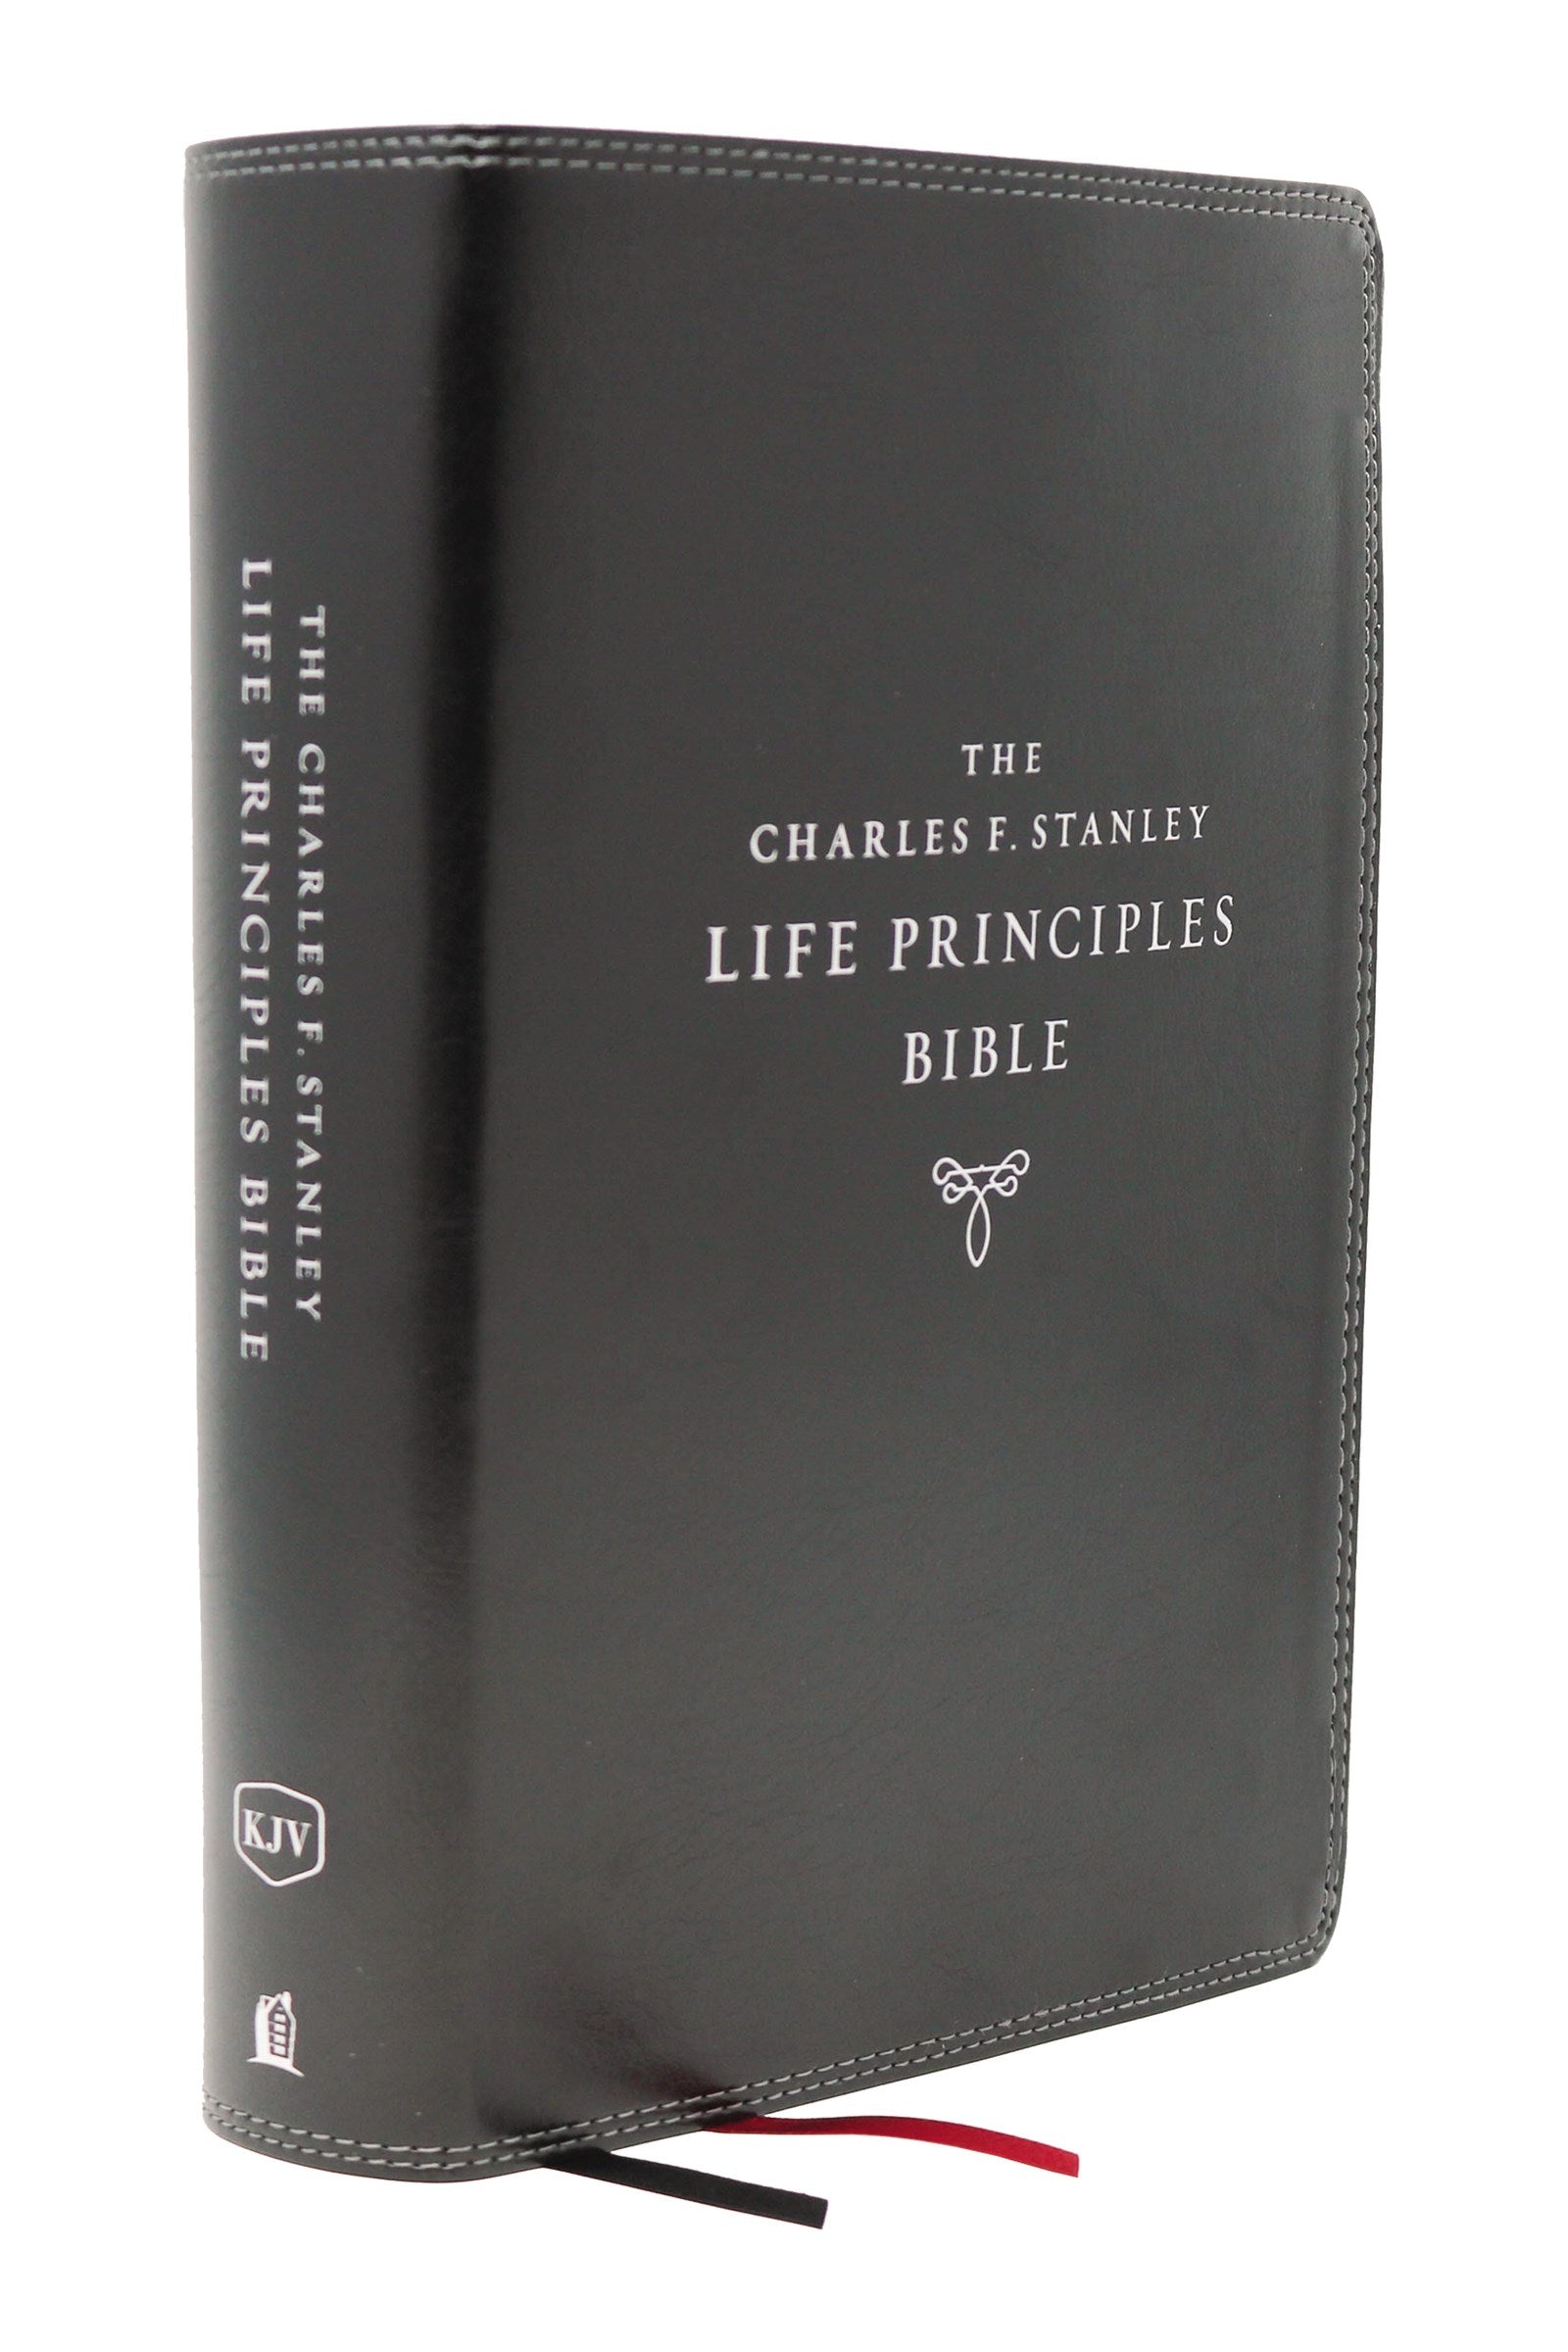 Seed of Abraham Christian Bookstore - (In)Courage - KJV Charles F. Stanley Life Principles Bible (2nd Edition) (Comfort Print)-Black Leathersoft Indexed